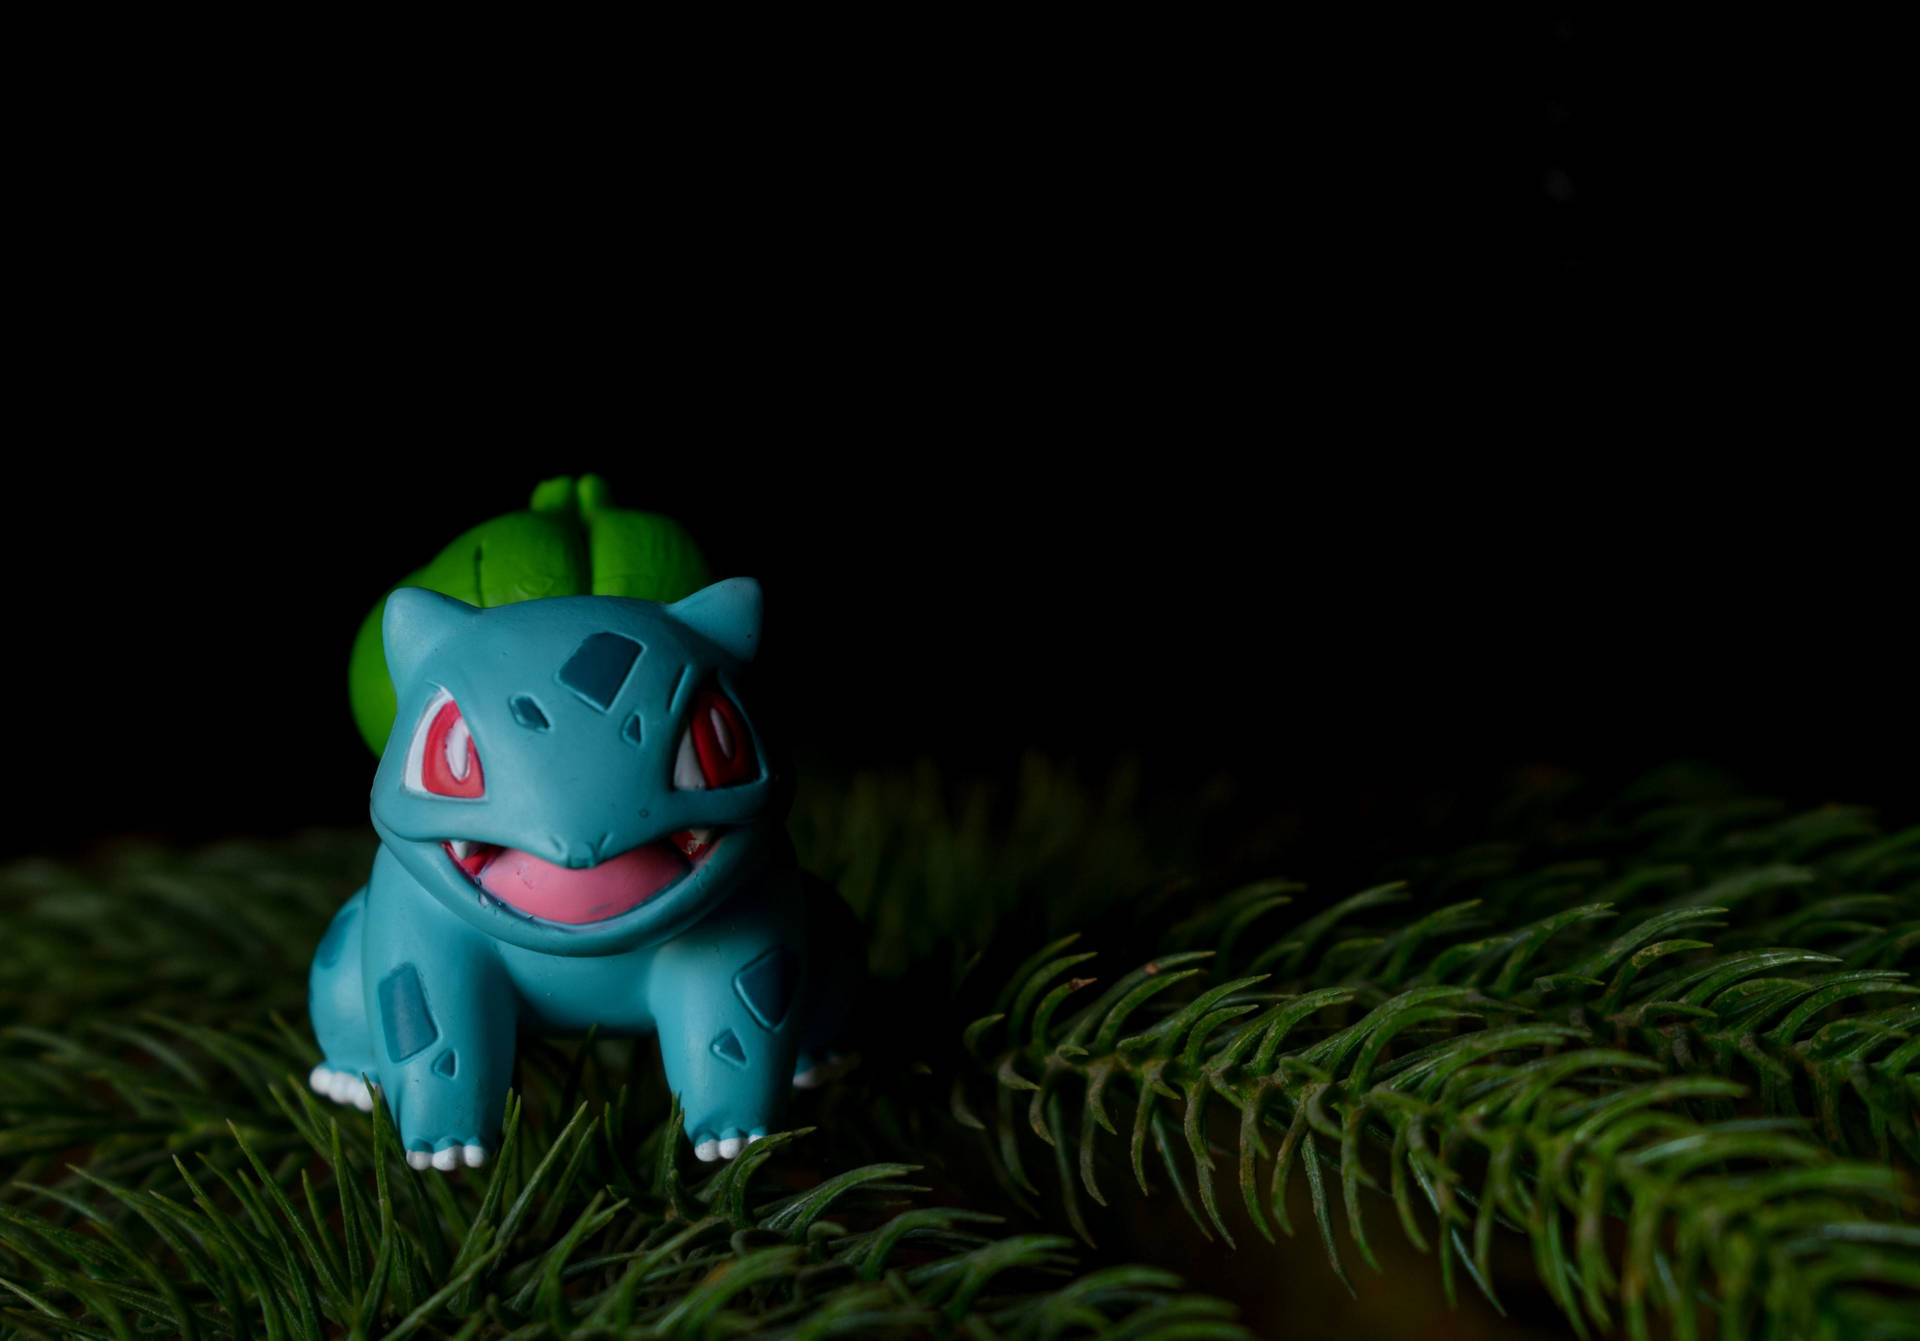 Cuddly Bulbasaur Toy Enjoying A Snack In The Pine Forest Background